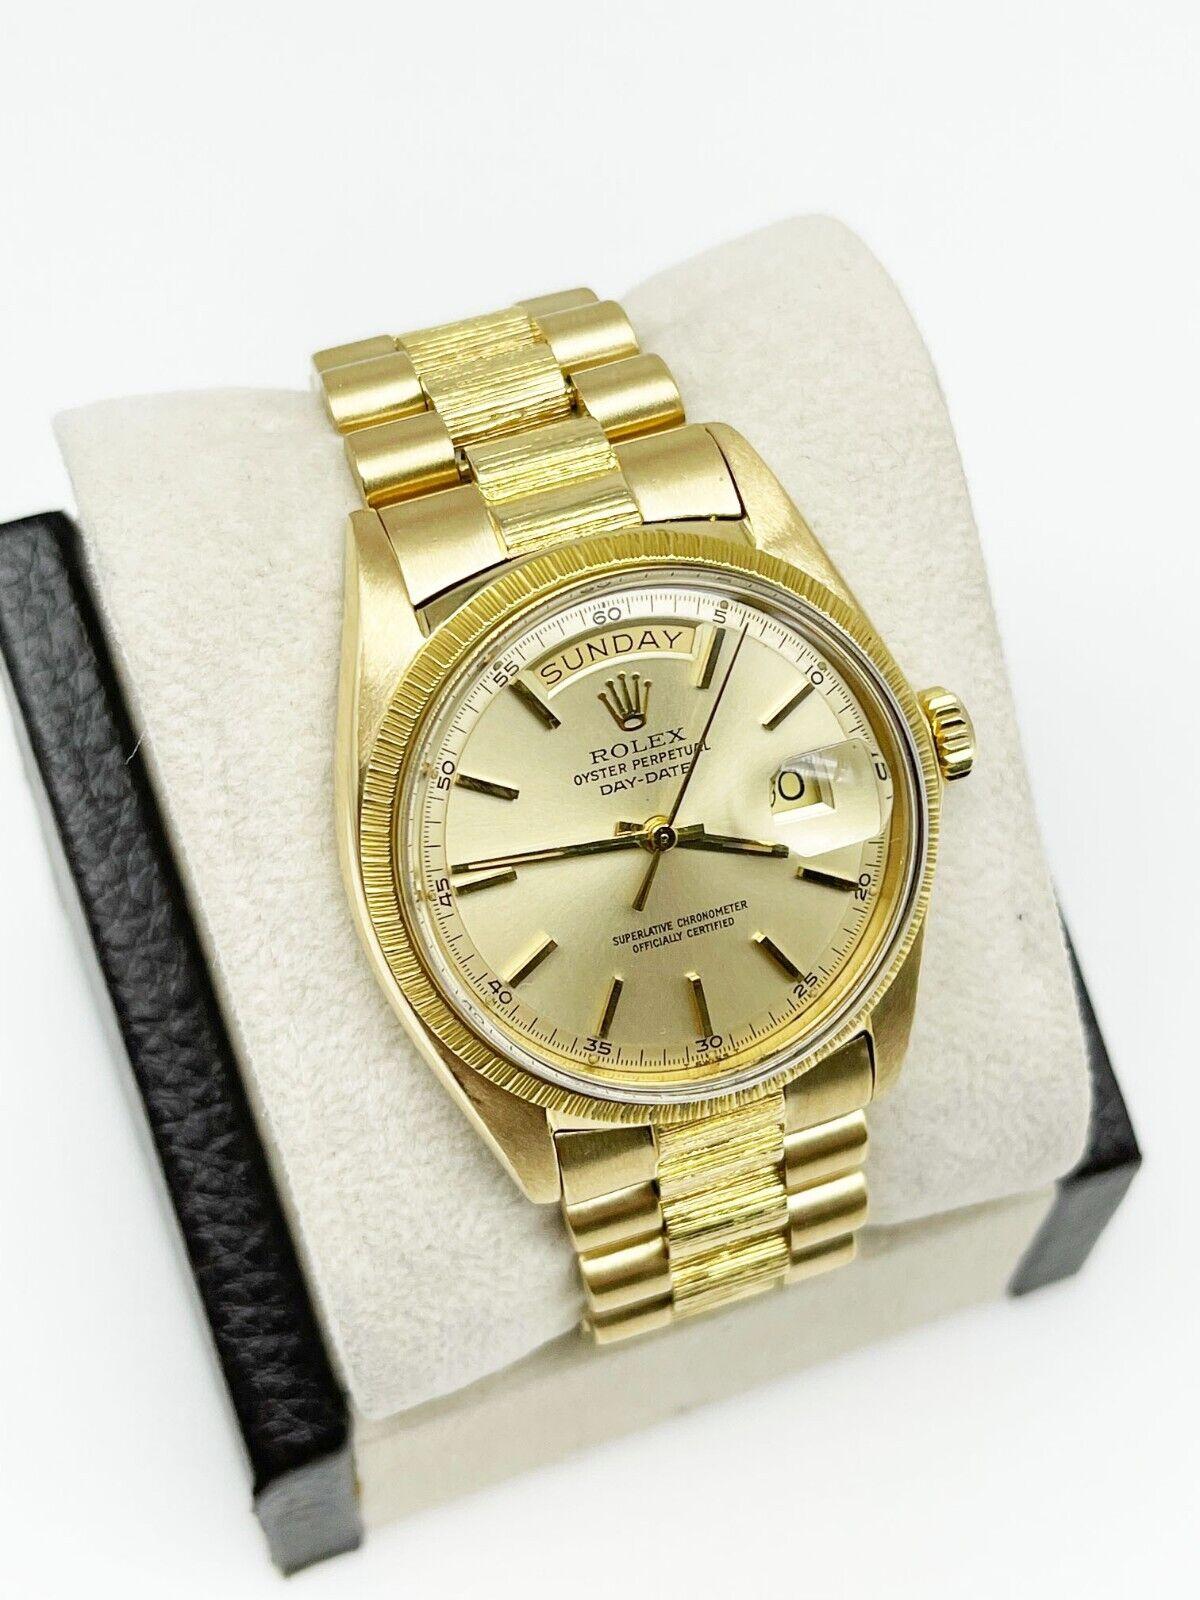 Style Number: 1807

 

Serial: 2747***


Model: President Day-Date

 

Case Material: 18K Yellow Gold

 

Band: 18K Yellow Gold bark finish

 

Bezel: 18K Yellow Gold

 

Dial: Champagne

 

Face: Acrylic

 

Case Size: 36mm

 

Includes: 

-Elegant